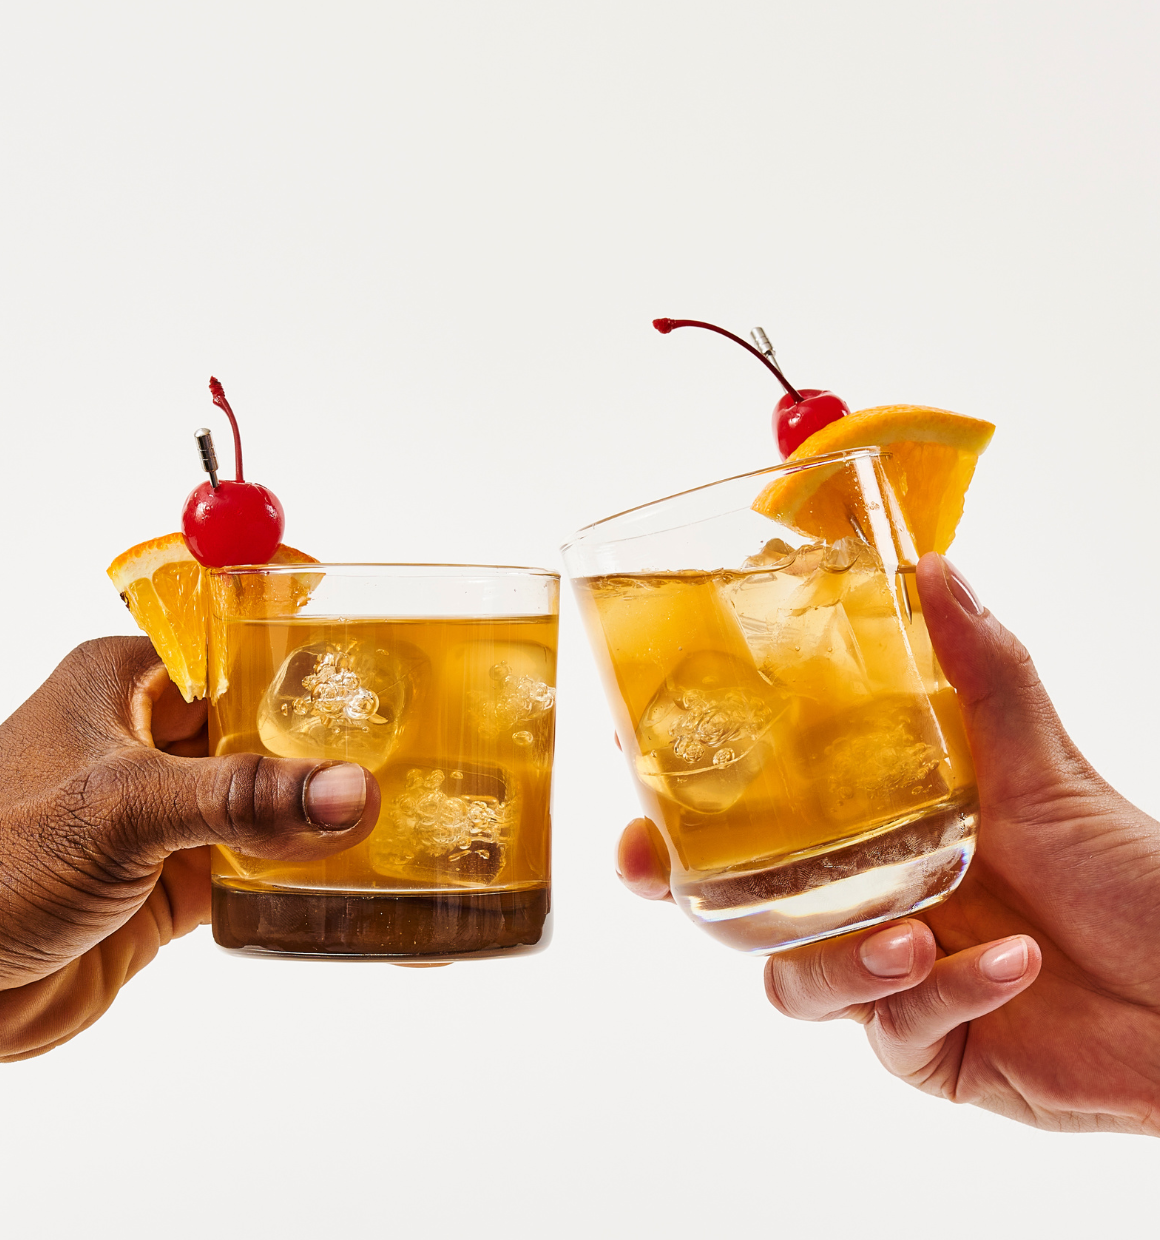 A Toast to Innovation: BLACK+DECKER® and Bartesian™ Shake Up Craft  Cocktails with bev by BLACK+DECKER™ - Feb 8, 2022